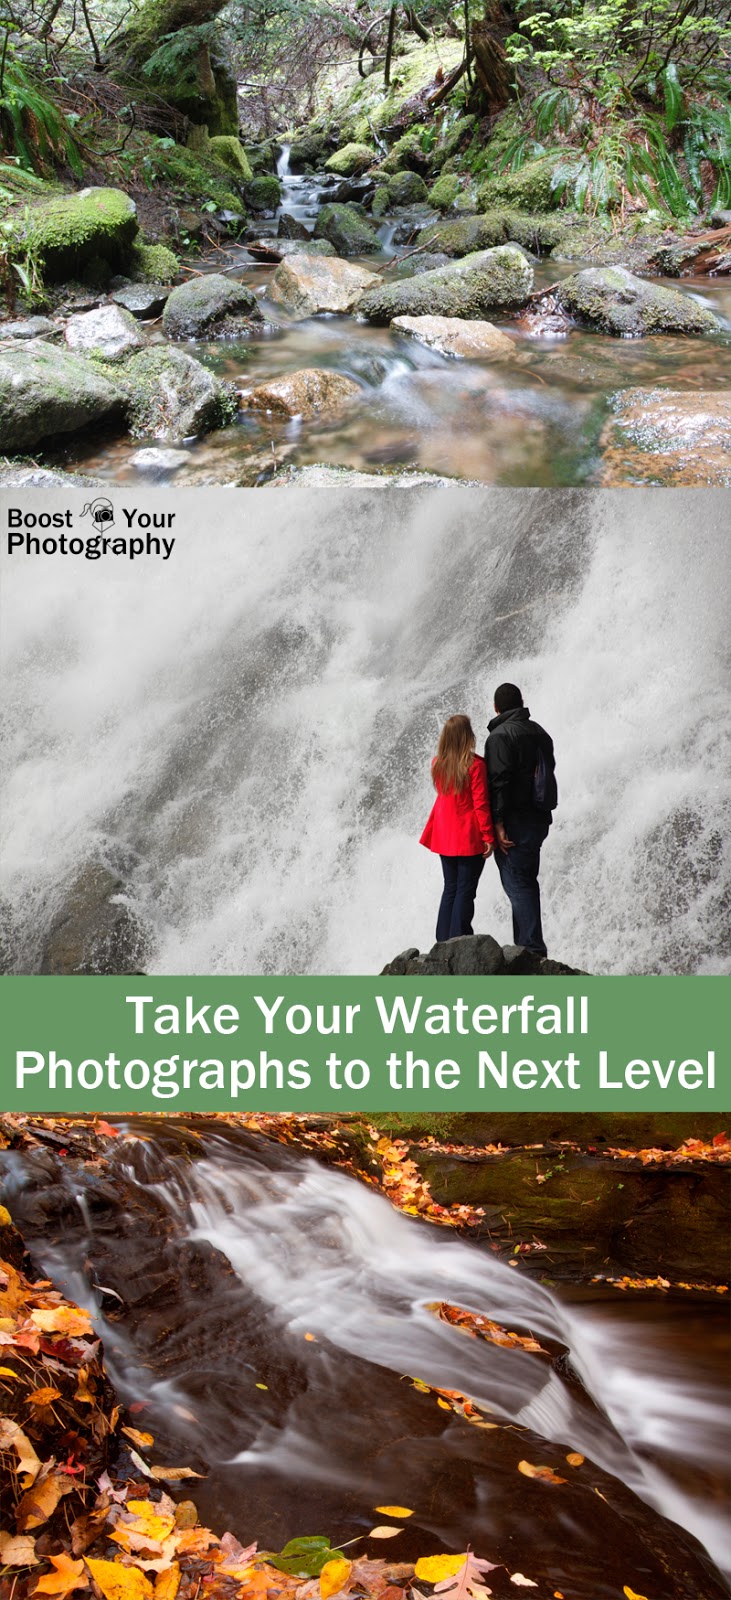 Take Your Waterfall Photographs to the Next Level | Boost Your Photography